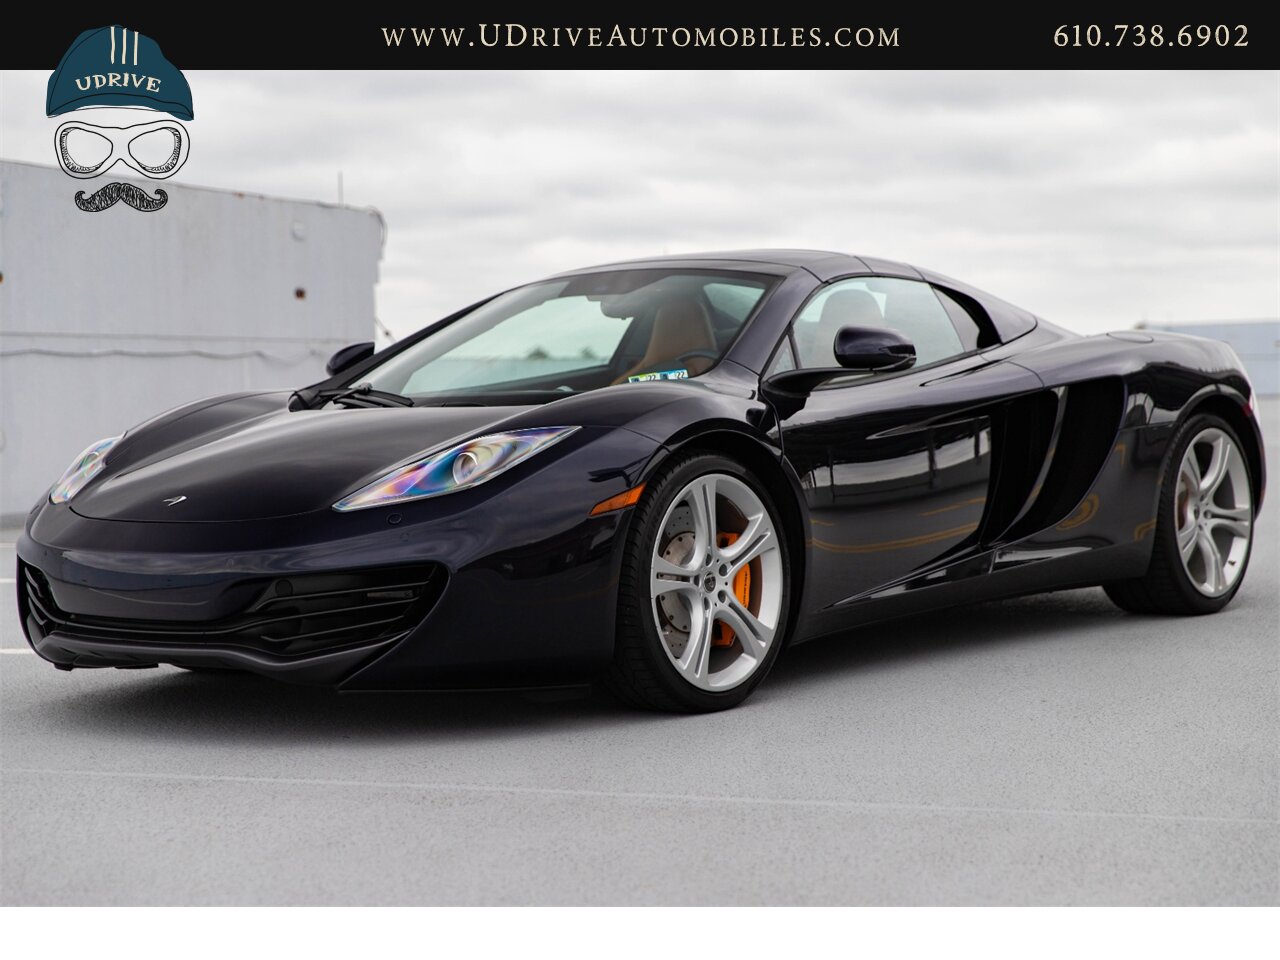 2013 McLaren MP4-12C Spider 1 Owner 6k Miles Carbon Fiber Full Leather  Sapphire Black over Natural Tan Leather - Photo 8 - West Chester, PA 19382